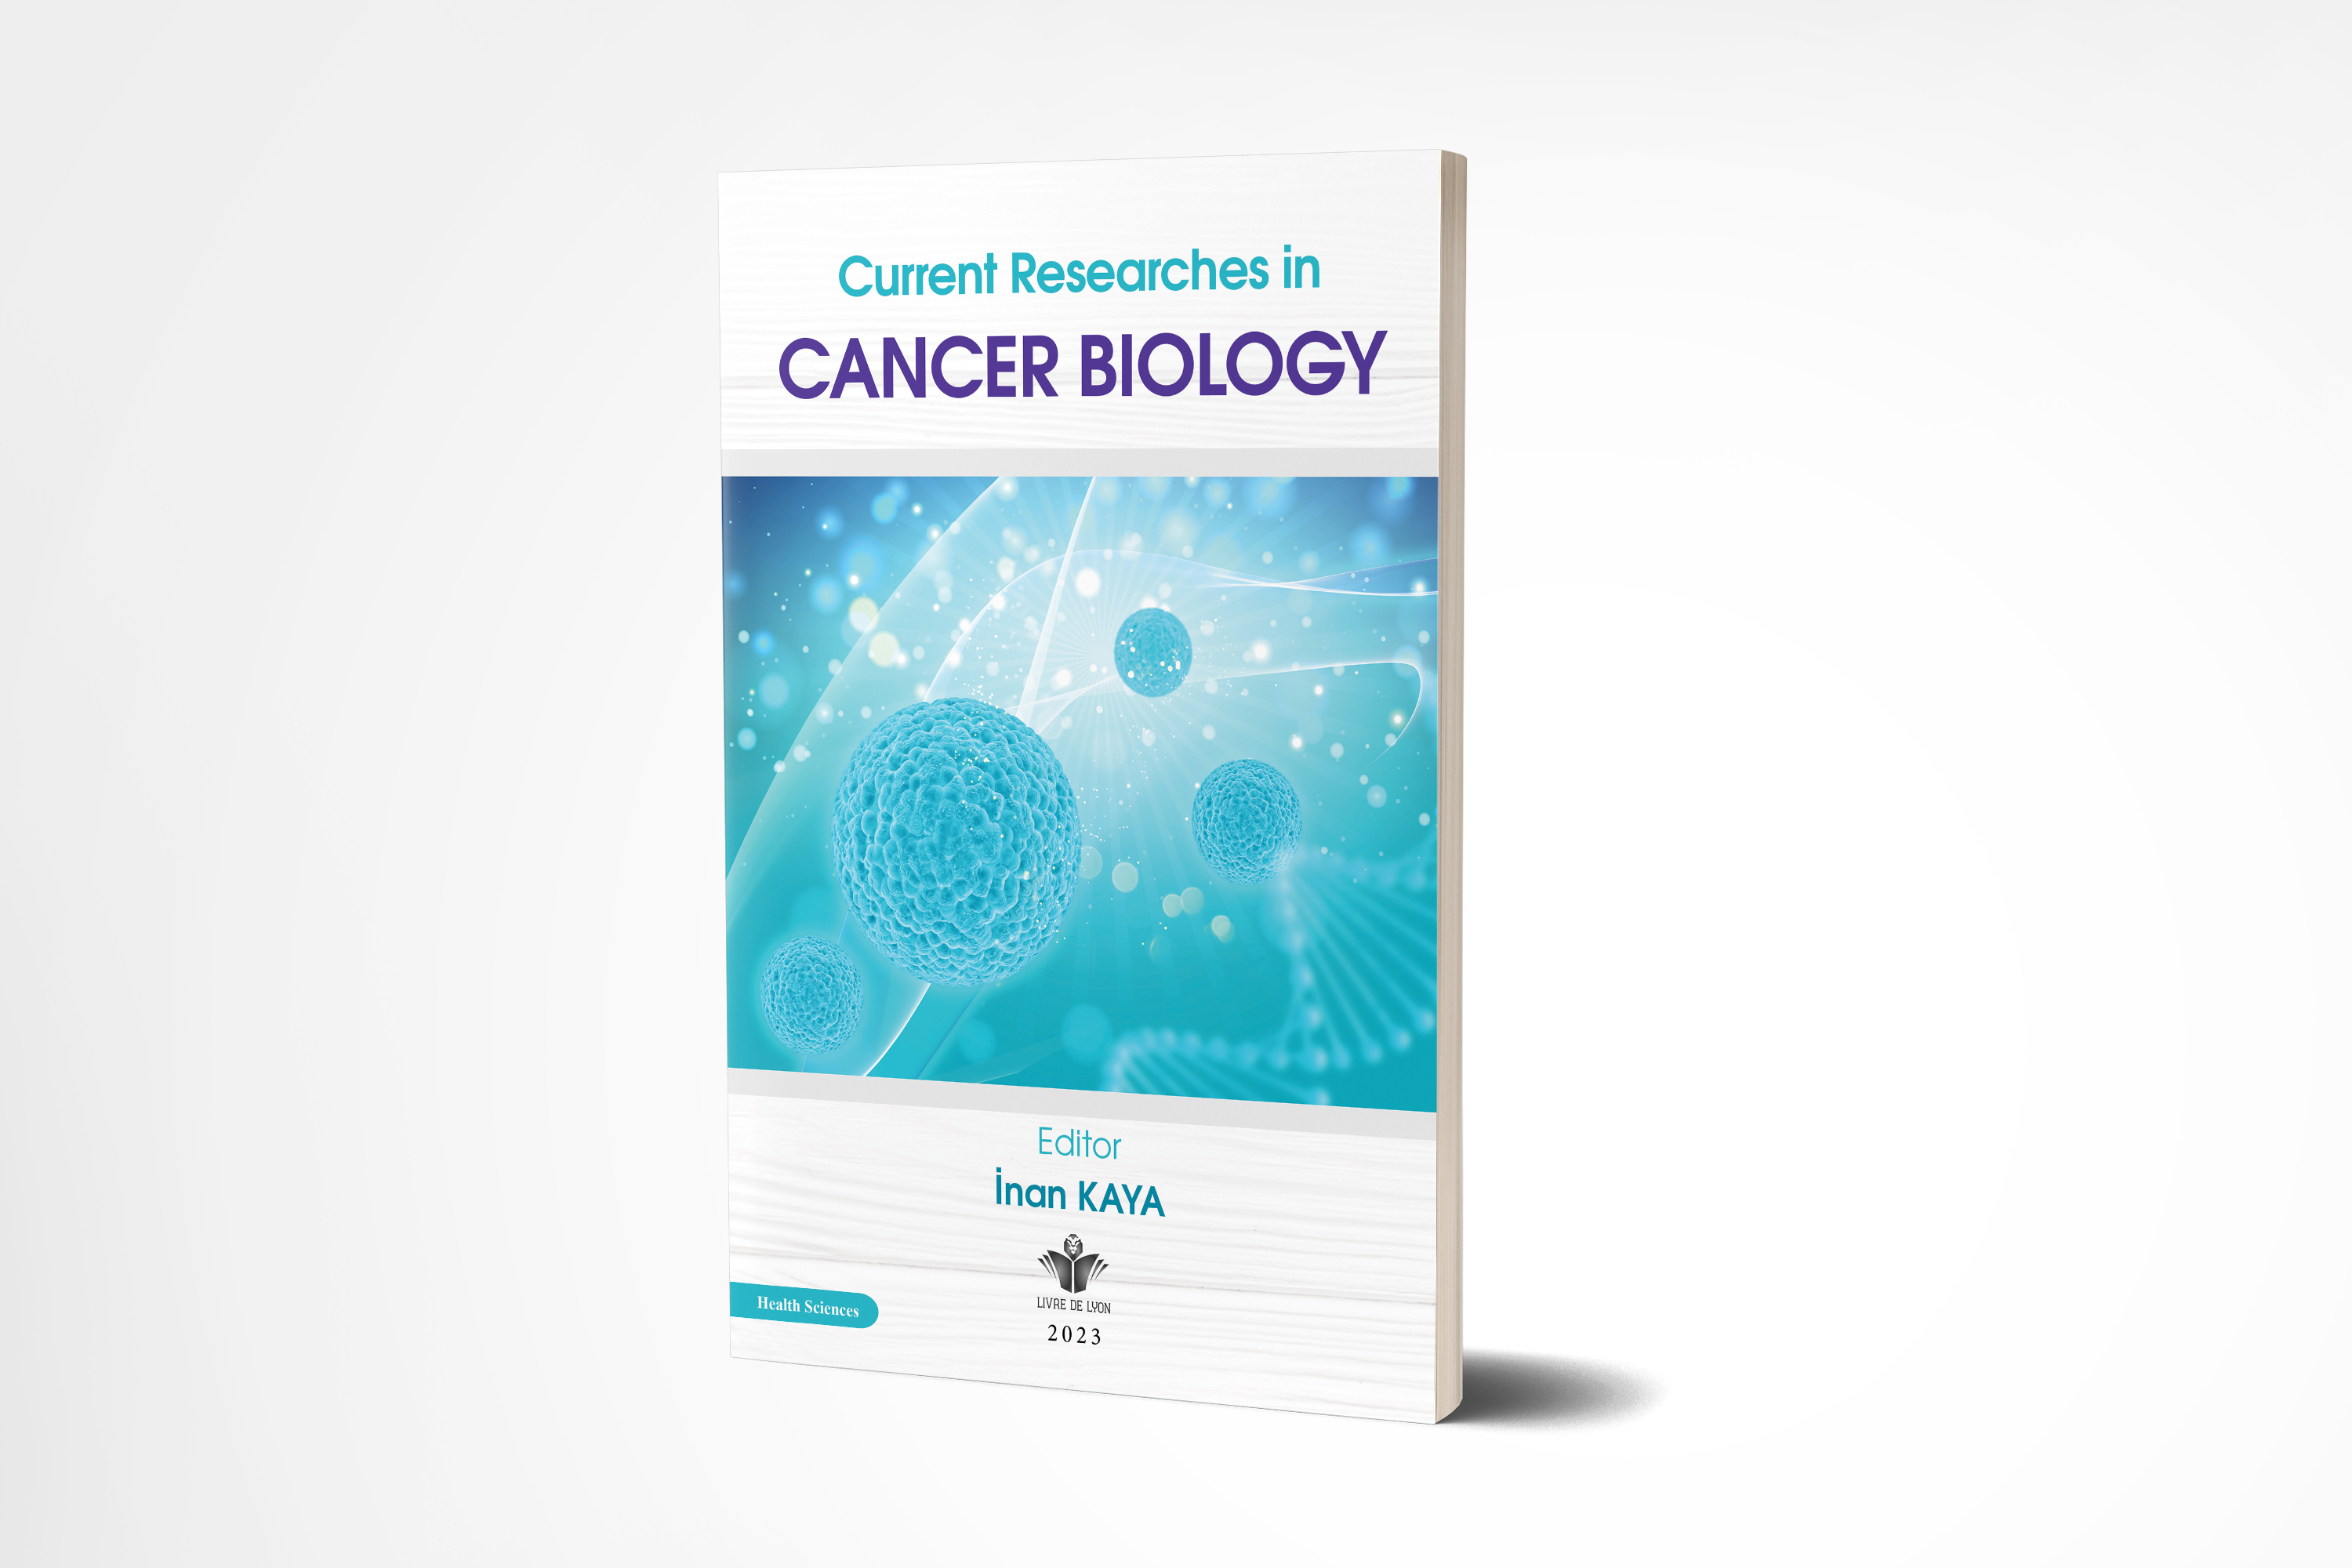 Current Researches in Cancer Biology